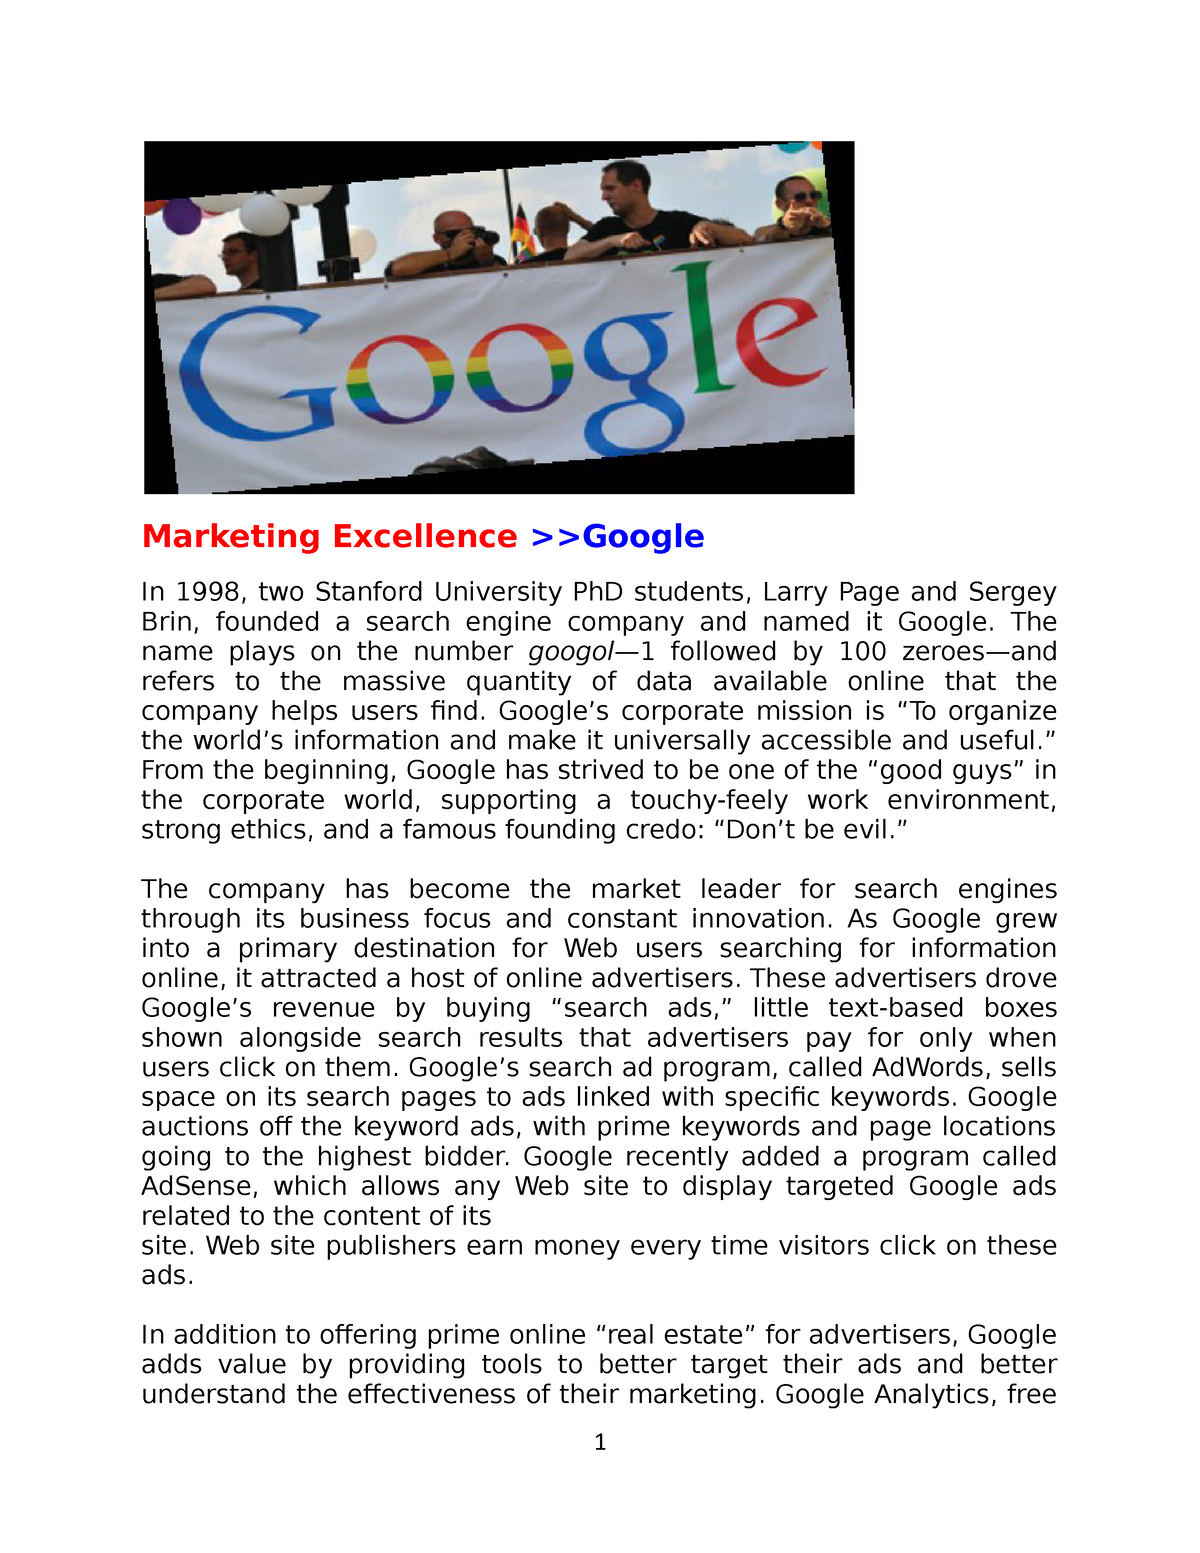 marketing excellence google case study solution